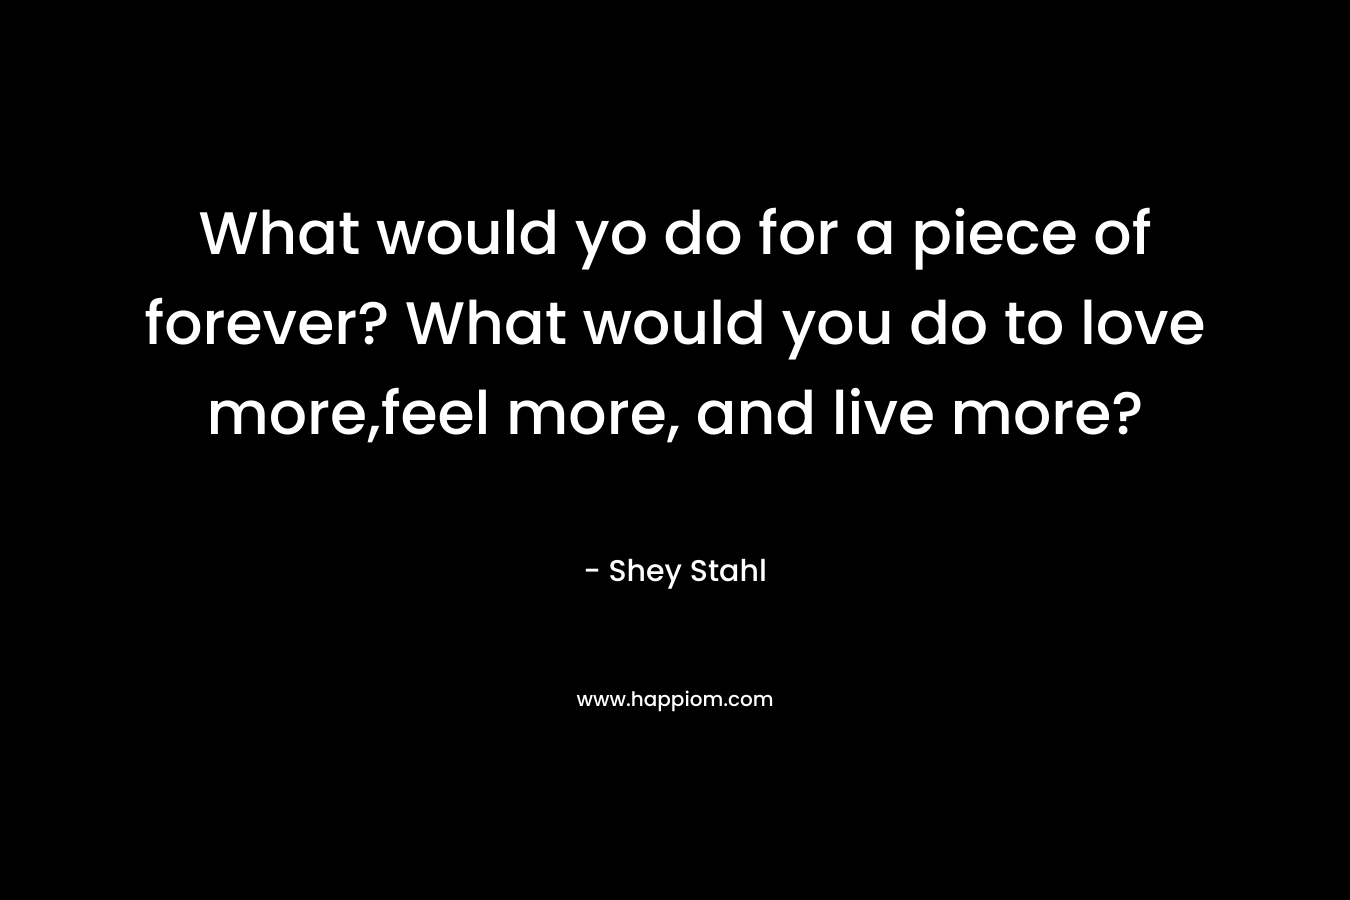 What would yo do for a piece of forever? What would you do to love more,feel more, and live more? – Shey Stahl